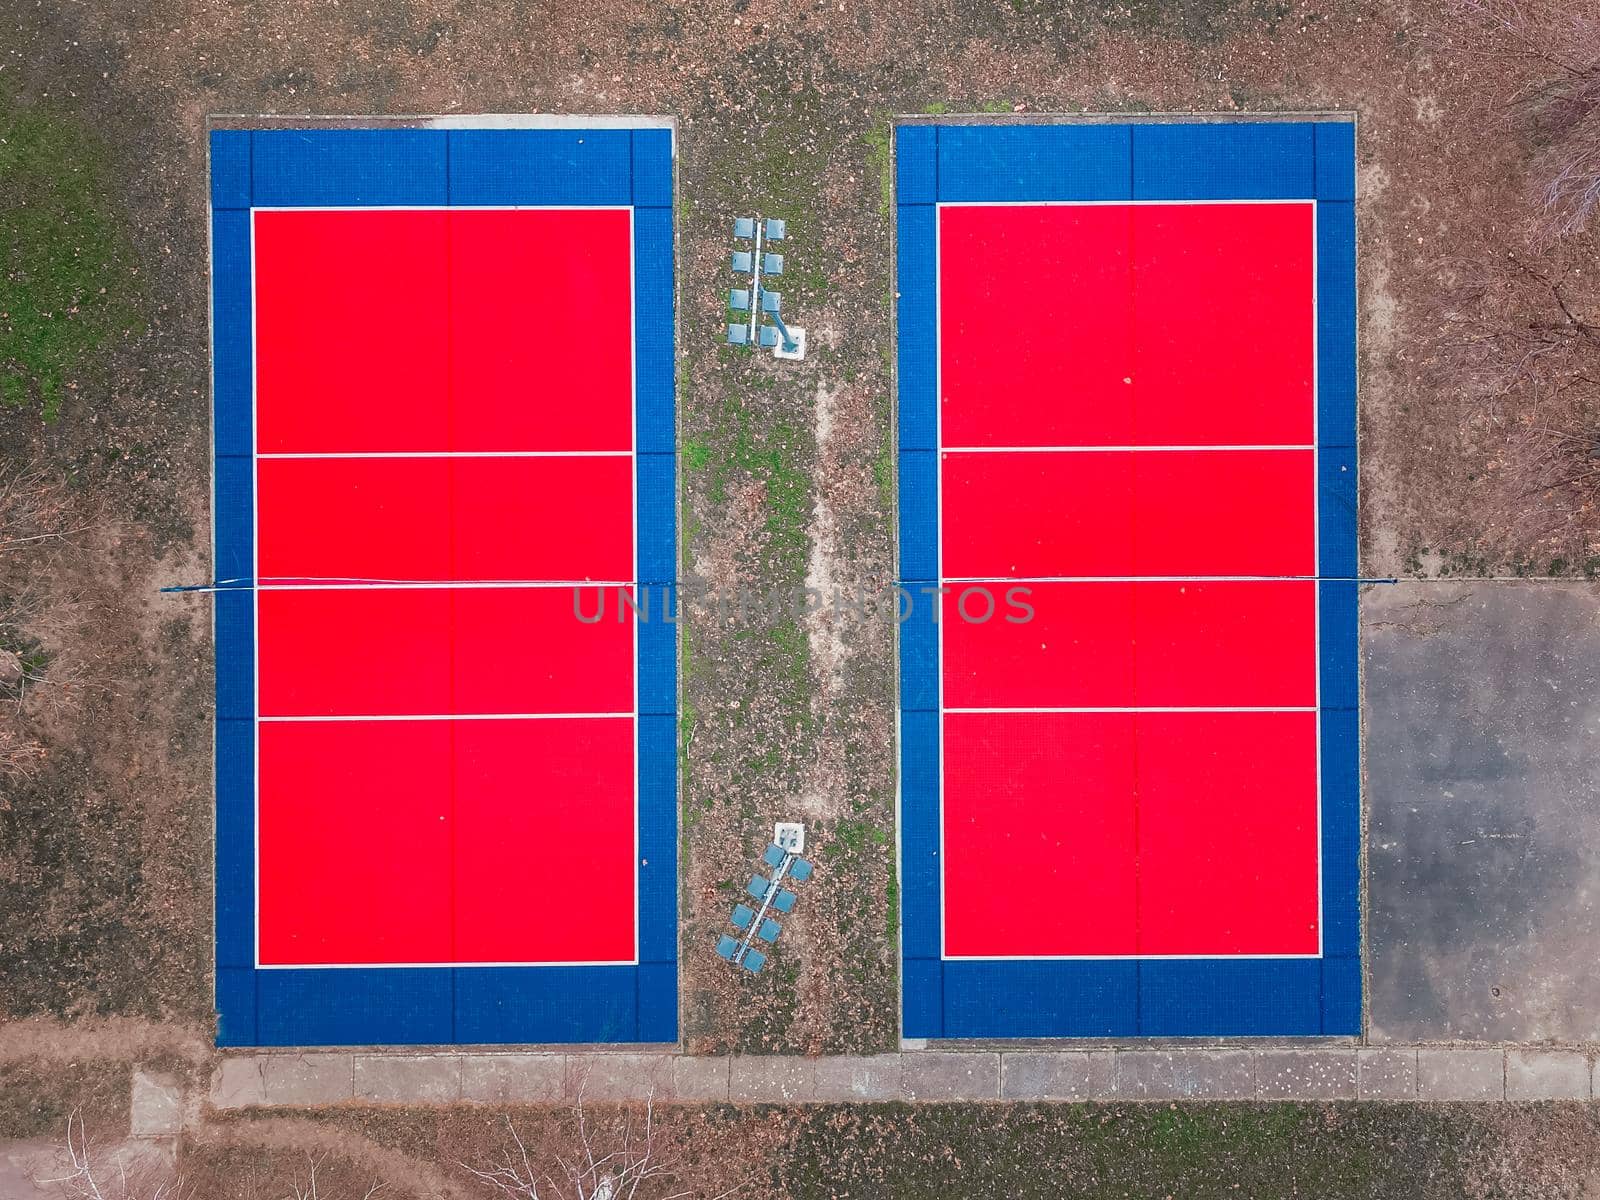 Aerial view of a red and blue  outdoor volleyball fields. Outdoor sport grounds with red and blue plastic surface for playing volleyball, winter shot by Slast20